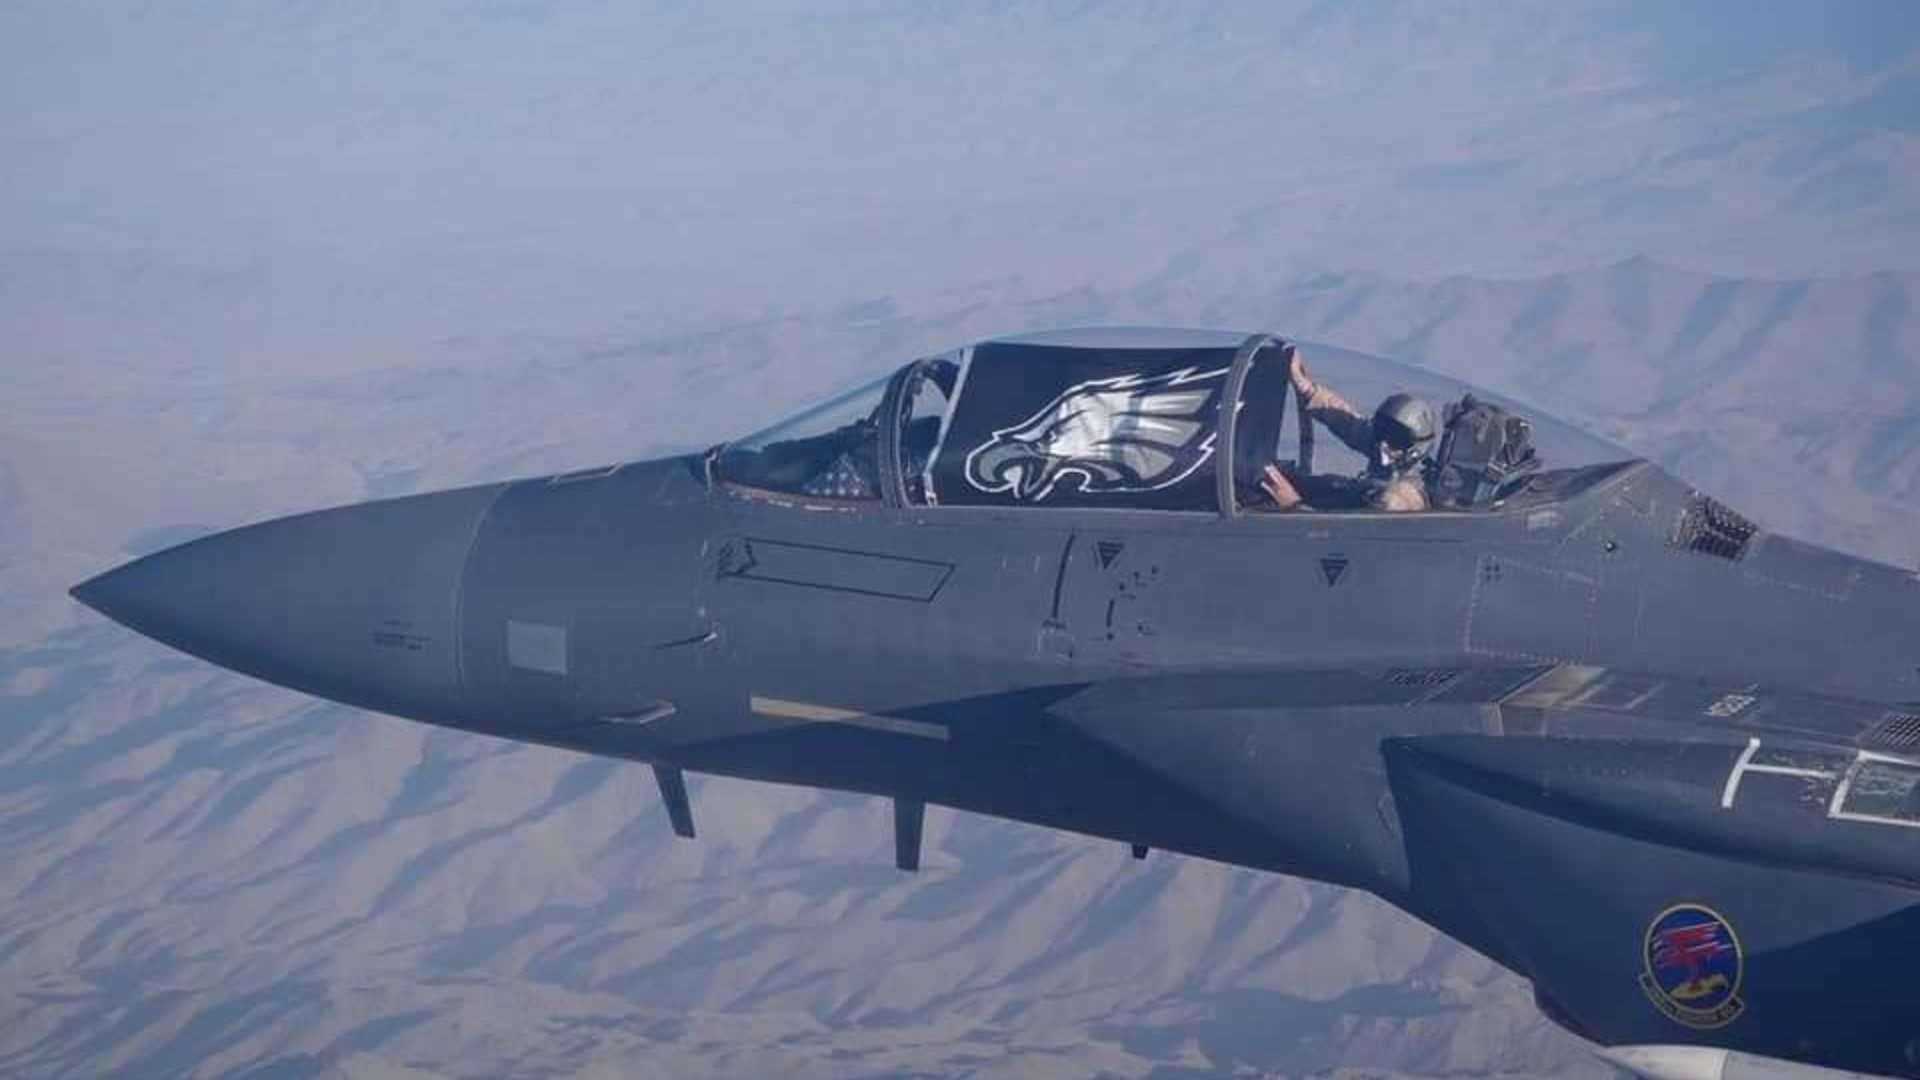 A former Air Force fighter pilot displayed his loyalty to his team when deployed in Afghanistan in 2011.